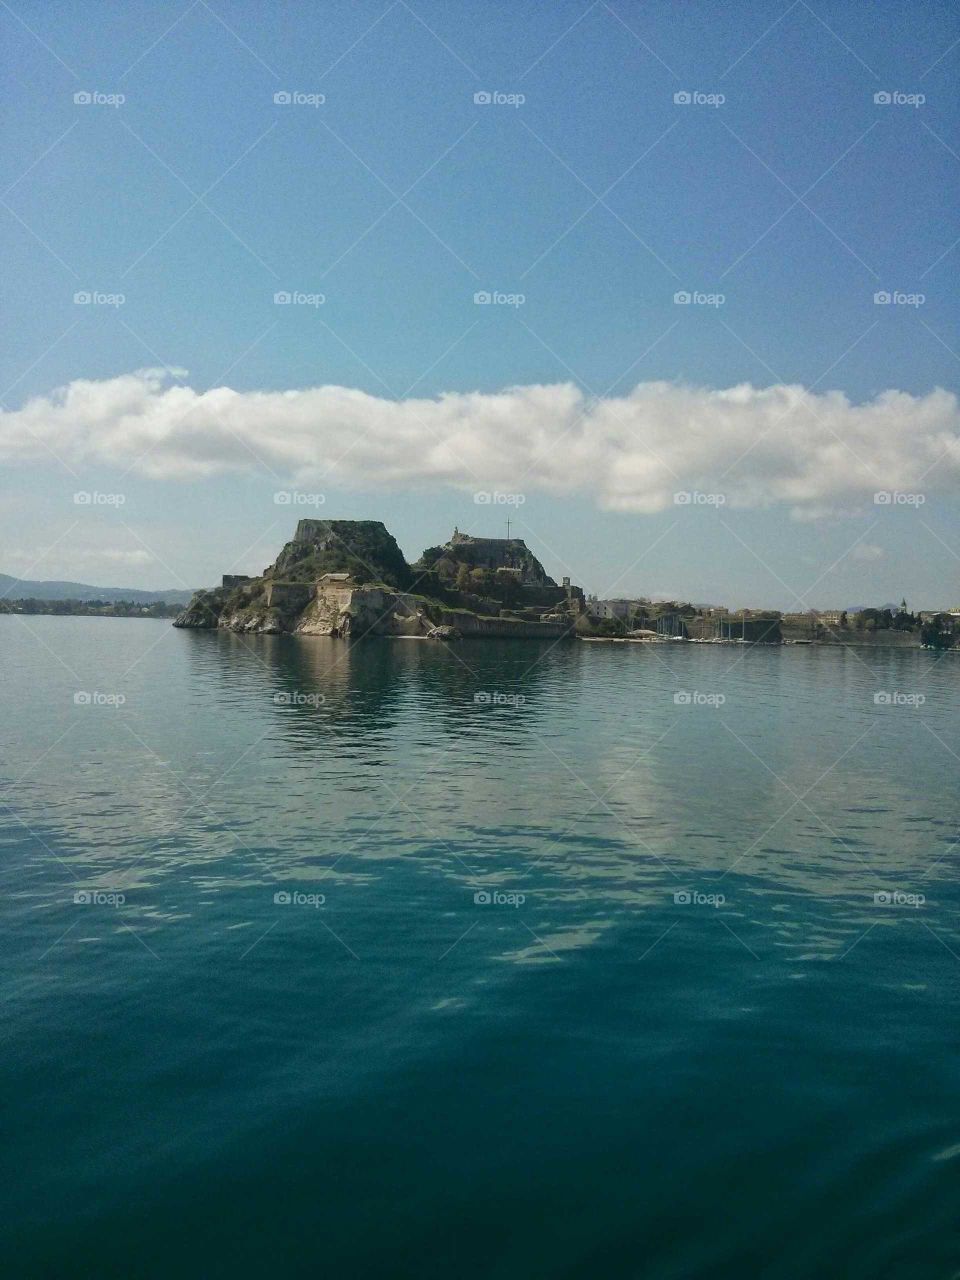 Leaving Corfu for mainland Greece by ferry